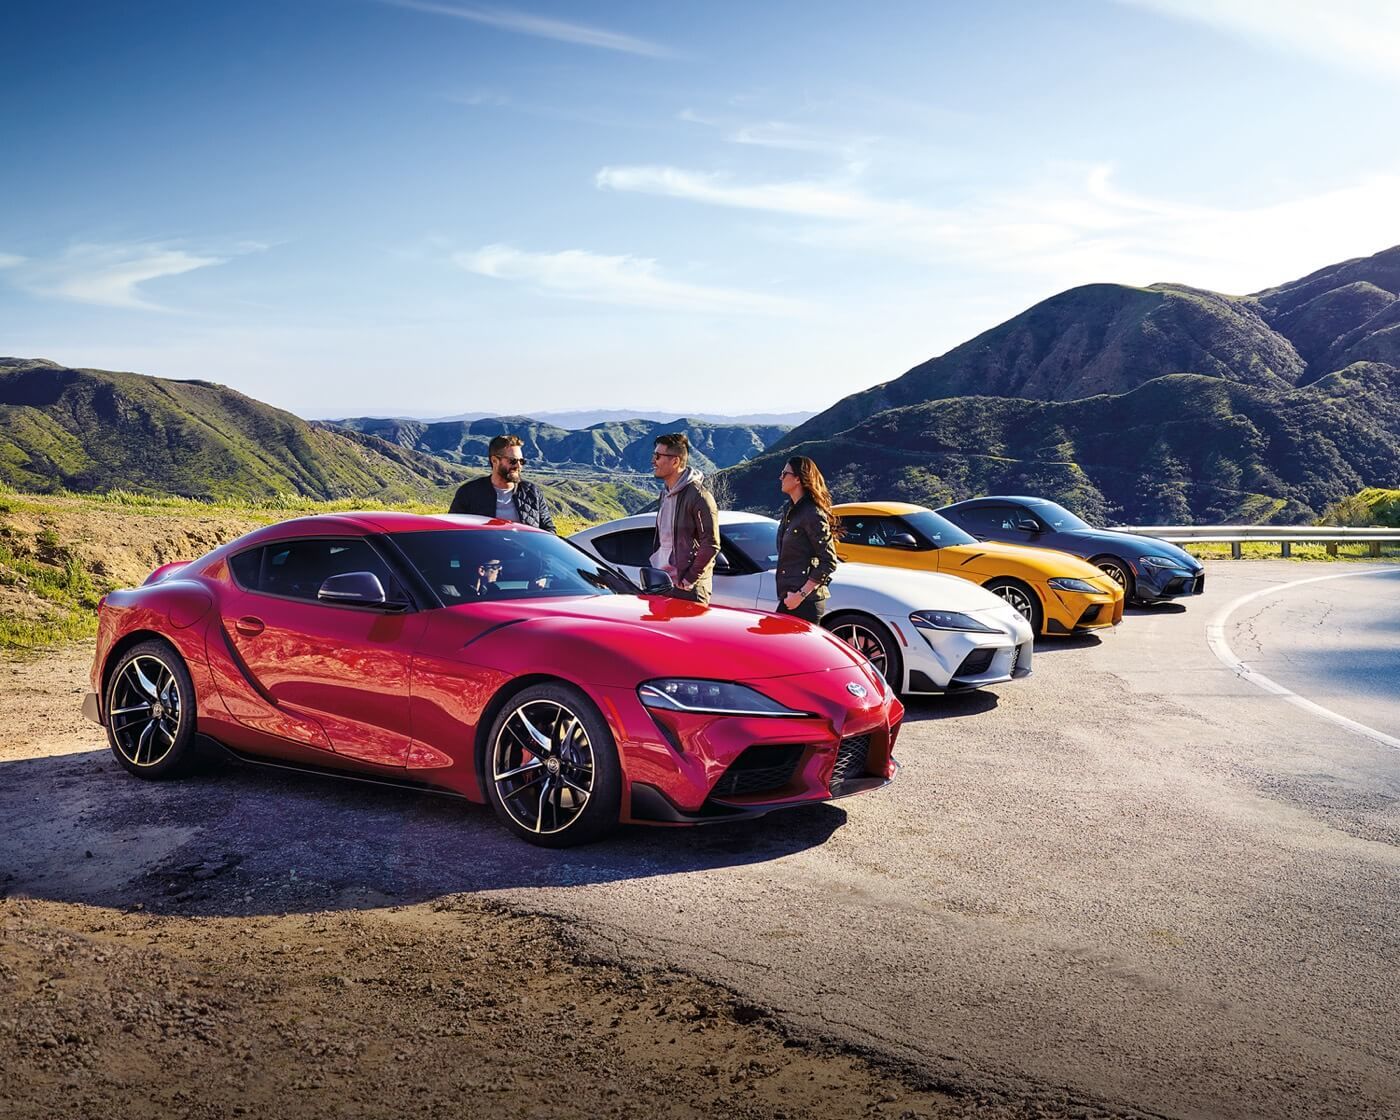 Four 2022 Toyota GR Supra in different color choices parked side by side at the side of a road